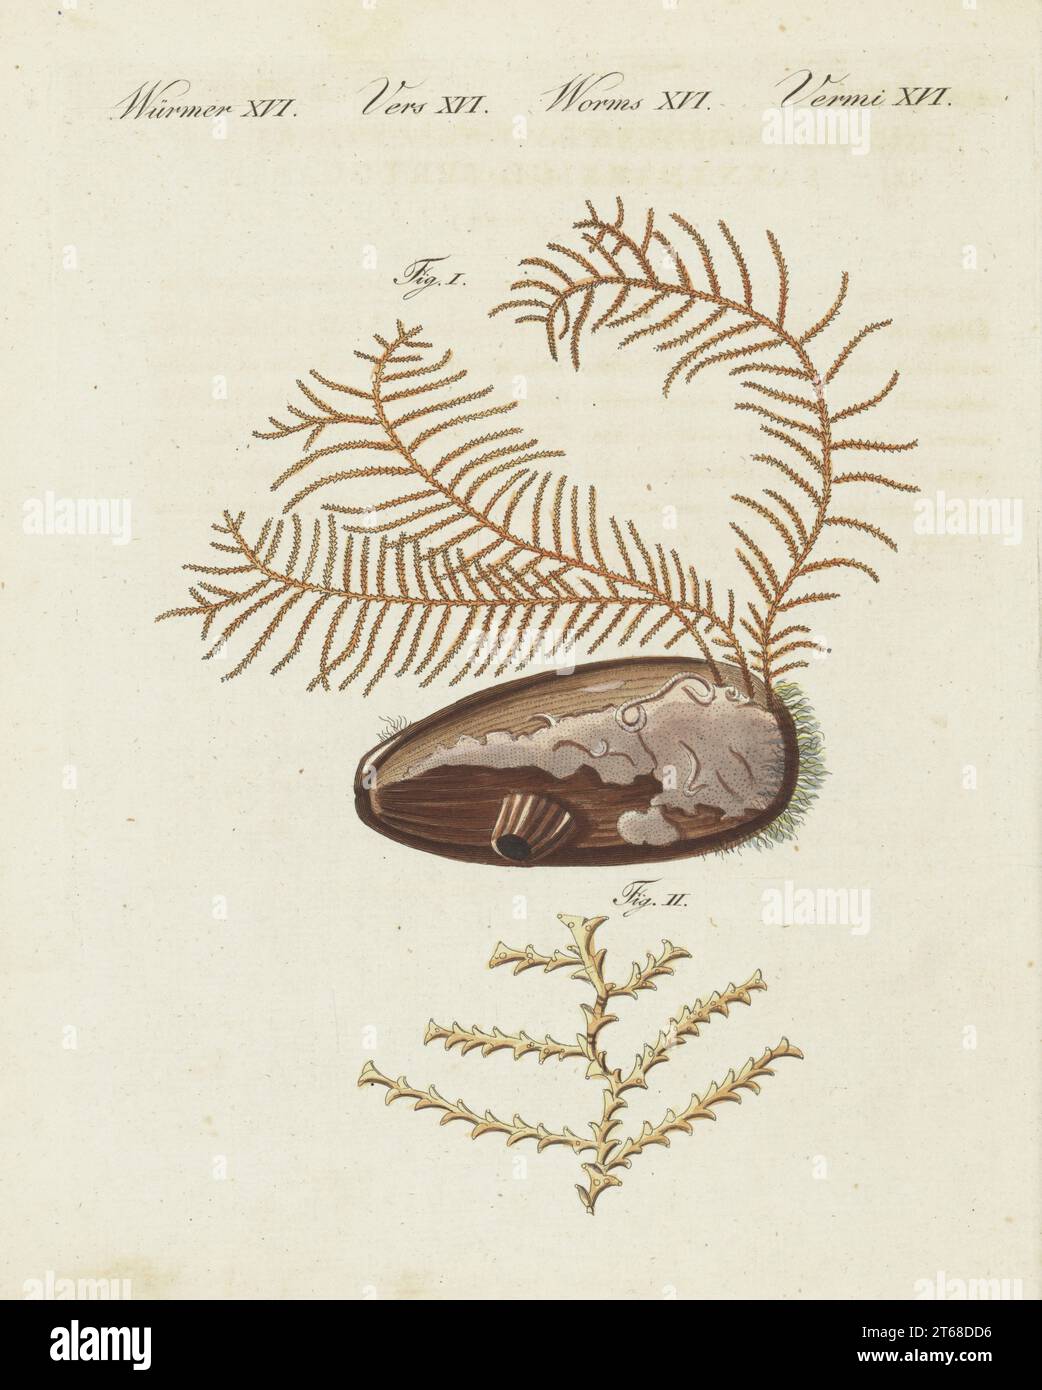 Sea fir, Abietinaria abietina I, adhering to a sea shell, and magnified II. Hydrozoan species, Sertularia abietina. Handcoloured copperplate engraving from Carl Bertuch's Bilderbuch fur Kinder (Picture Book for Children), Weimar, 1810. A 12-volume encyclopedia for children illustrated with almost 1,200 engraved plates on natural history, science, costume, mythology, etc., published from 1790-1830. Stock Photo